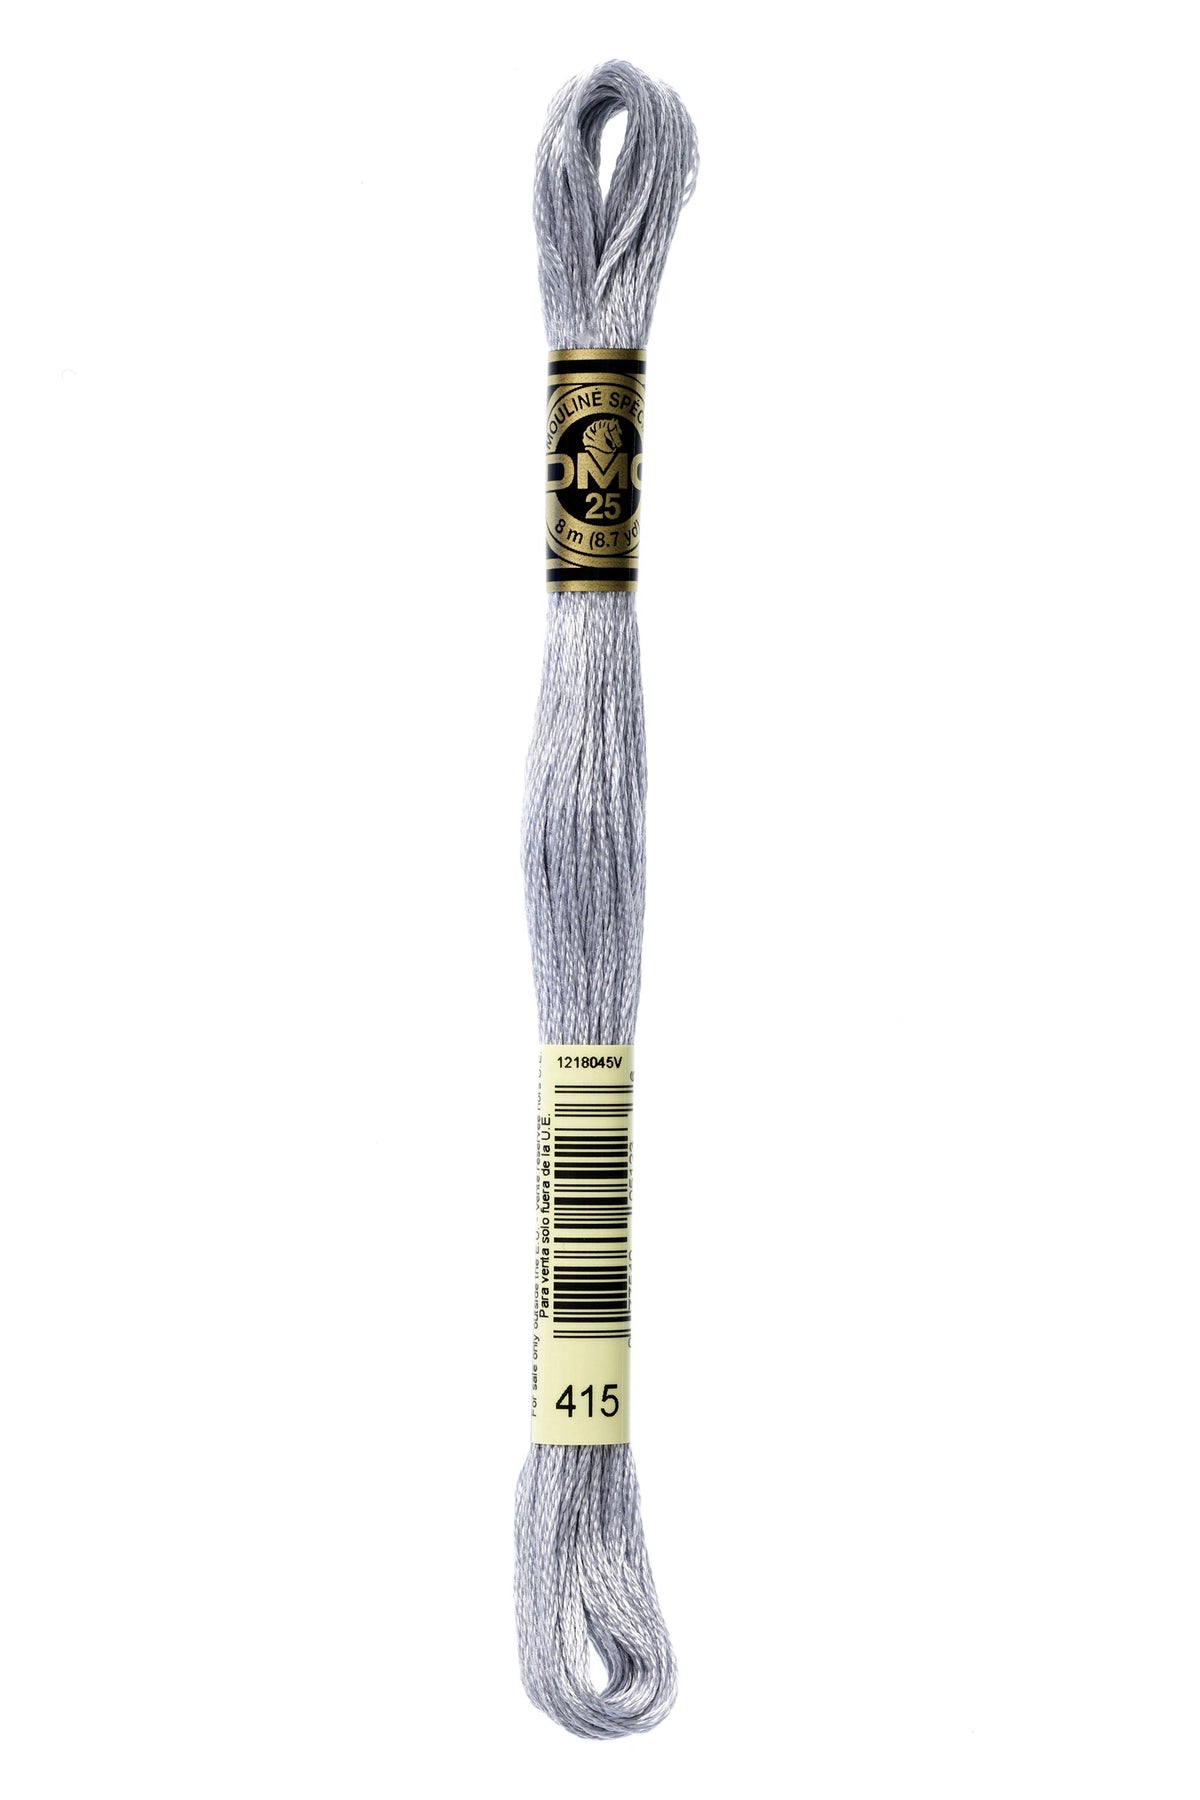 Cotton Six Stranded Embroidery Floss | DMC 326-703